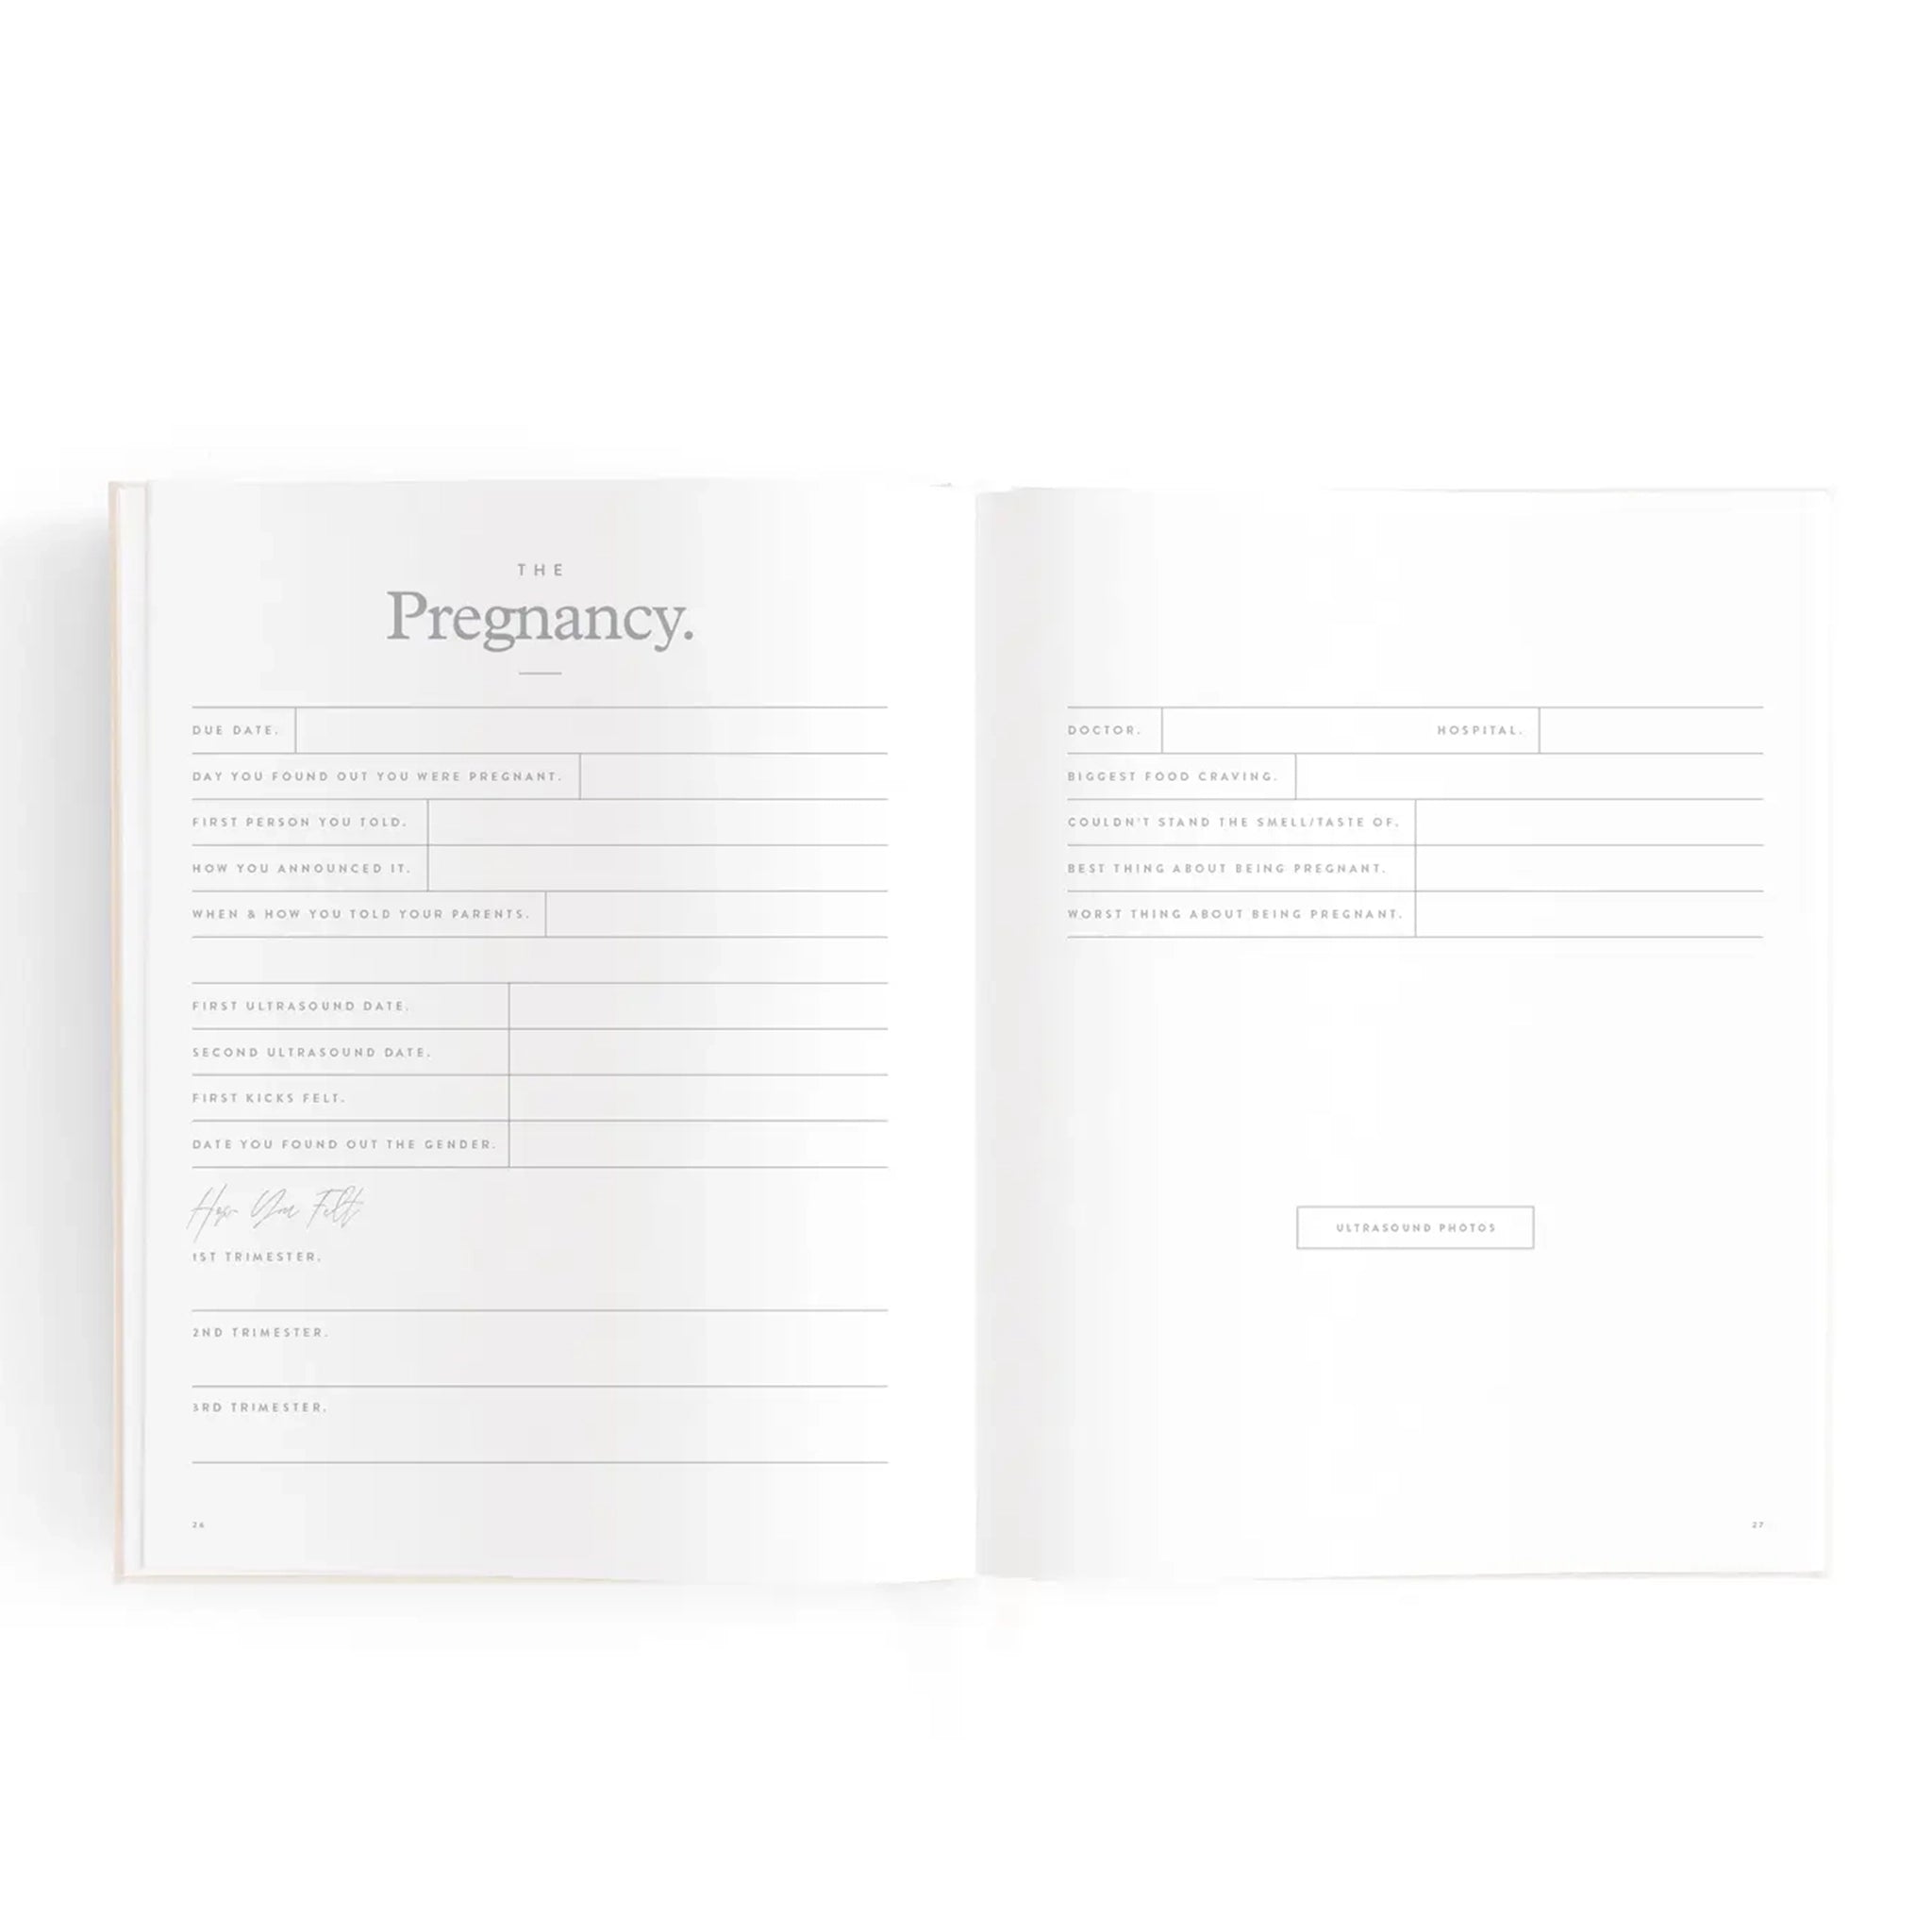 The book open to a page that has a place to write about the Pregnancy of the baby. 